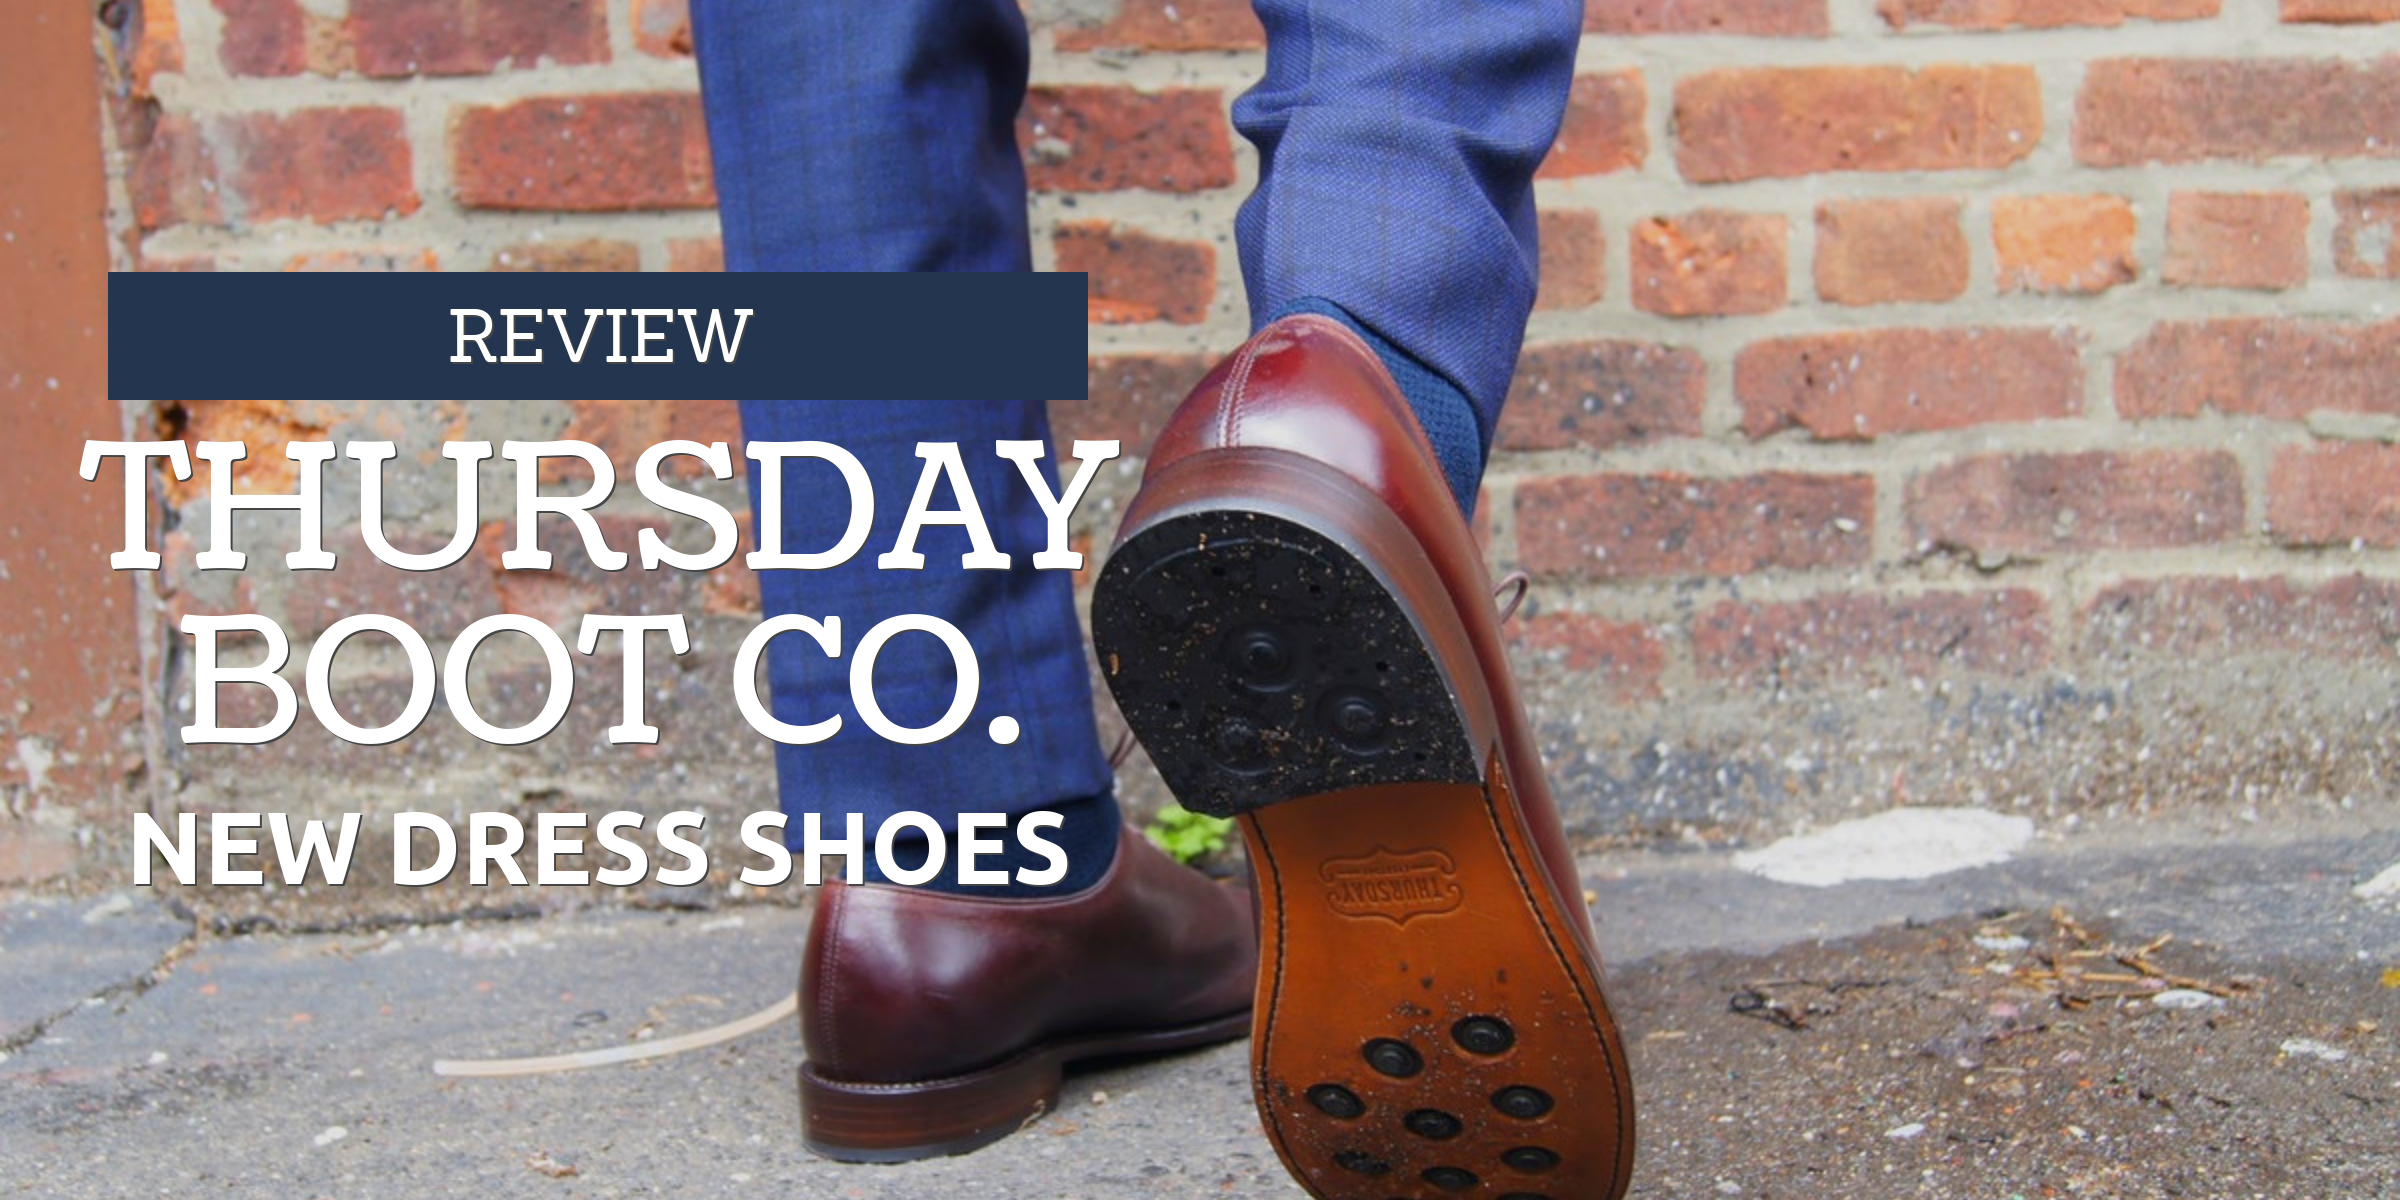 Dress Shoes from Thursday Boot Co 